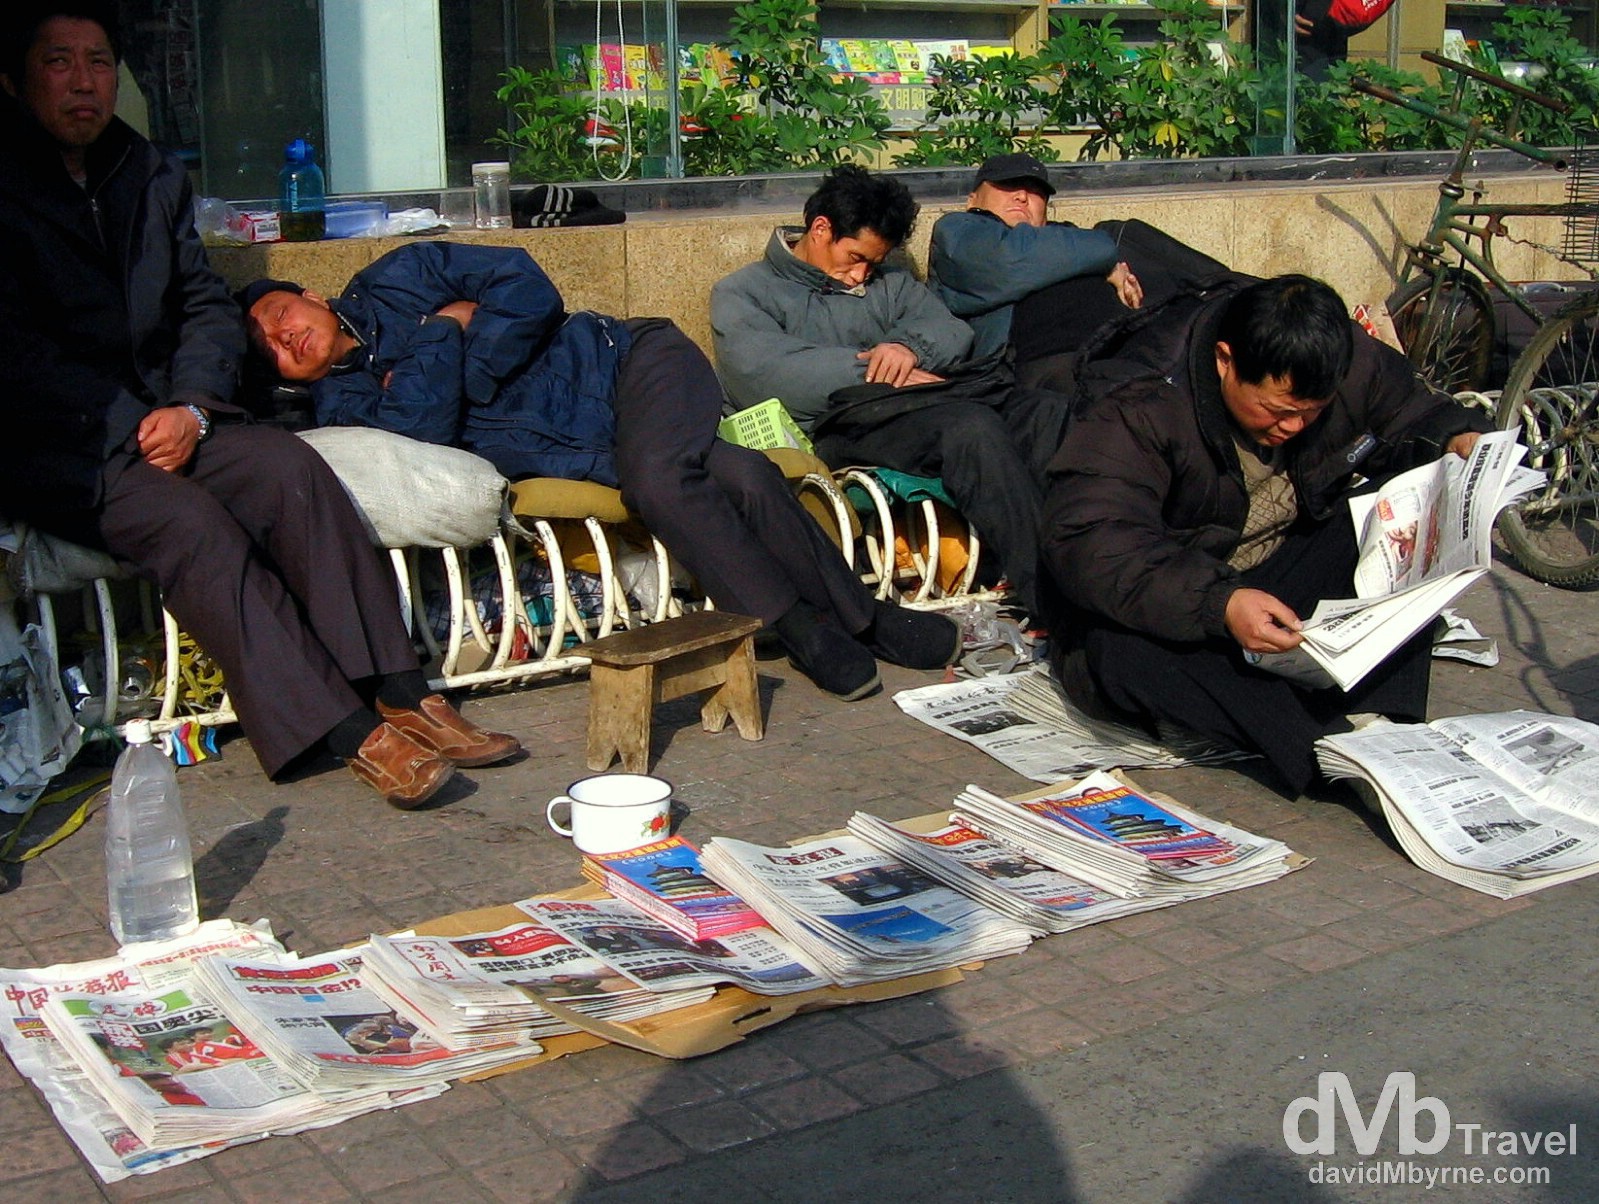 Snoozing on the streets of Beijing, China. February 10. 2006.